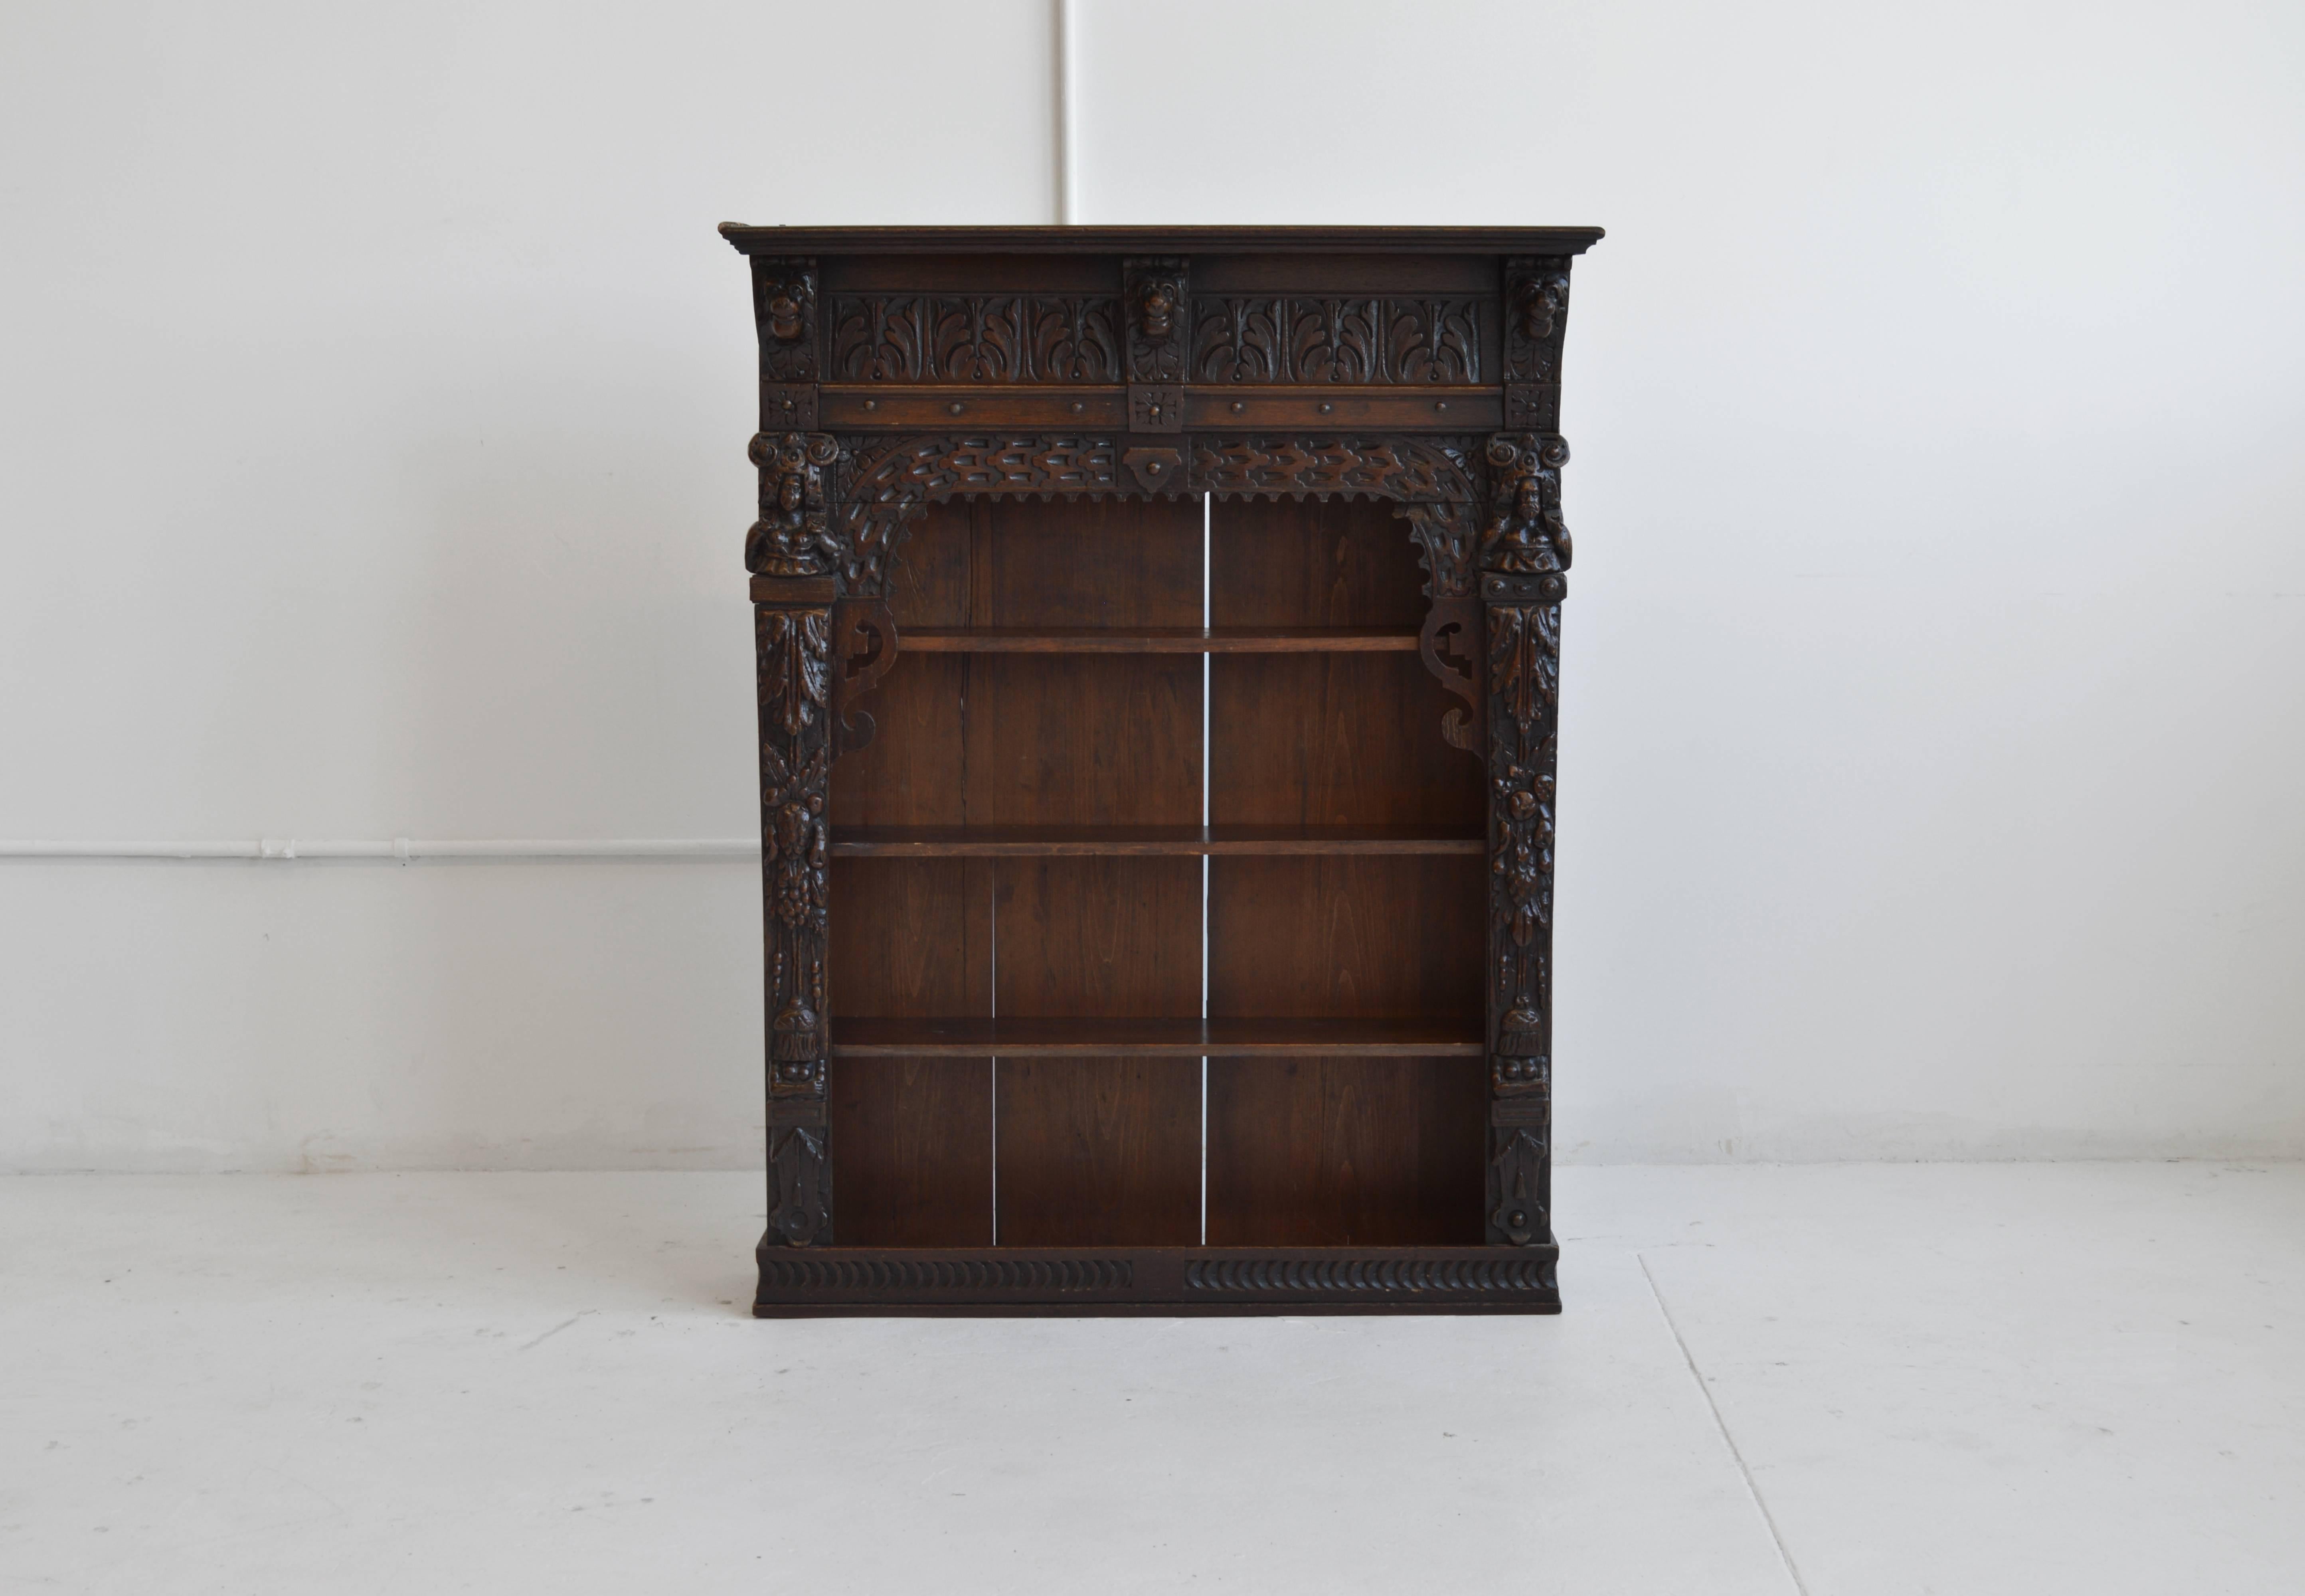 19th century Victorian antique oak carved wall cabinet originally from England. This handsome piece features ornate carvings in a deep, mahogany finish. Three lions are carved at the top among acanthus leaves along the top panel and a human bust at